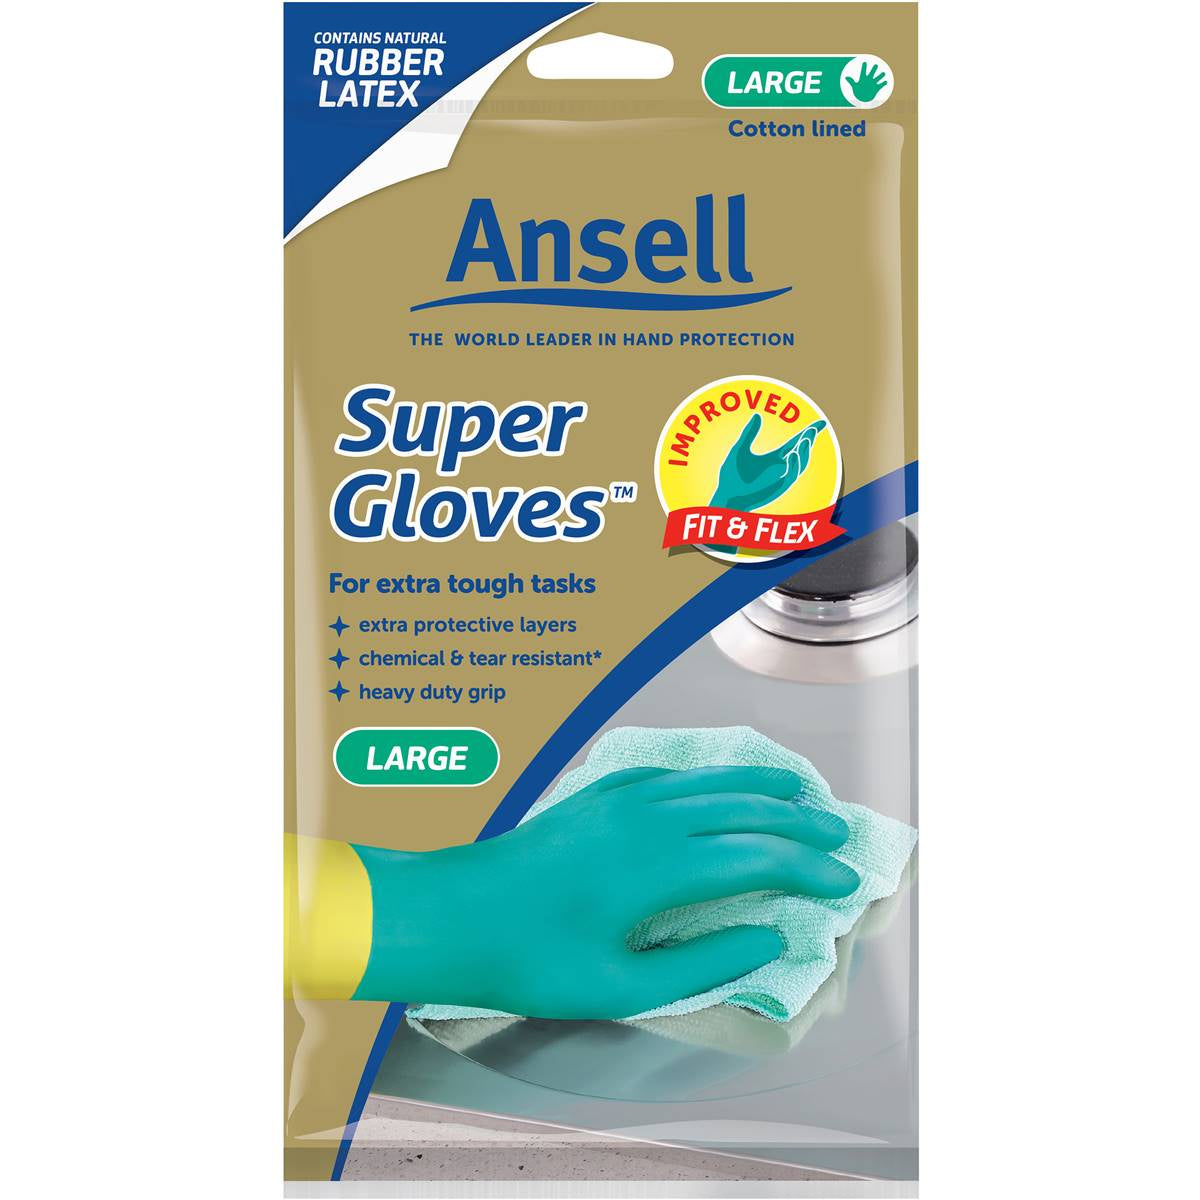 Ansell Gloves Super Large Size 9  - 1 pair